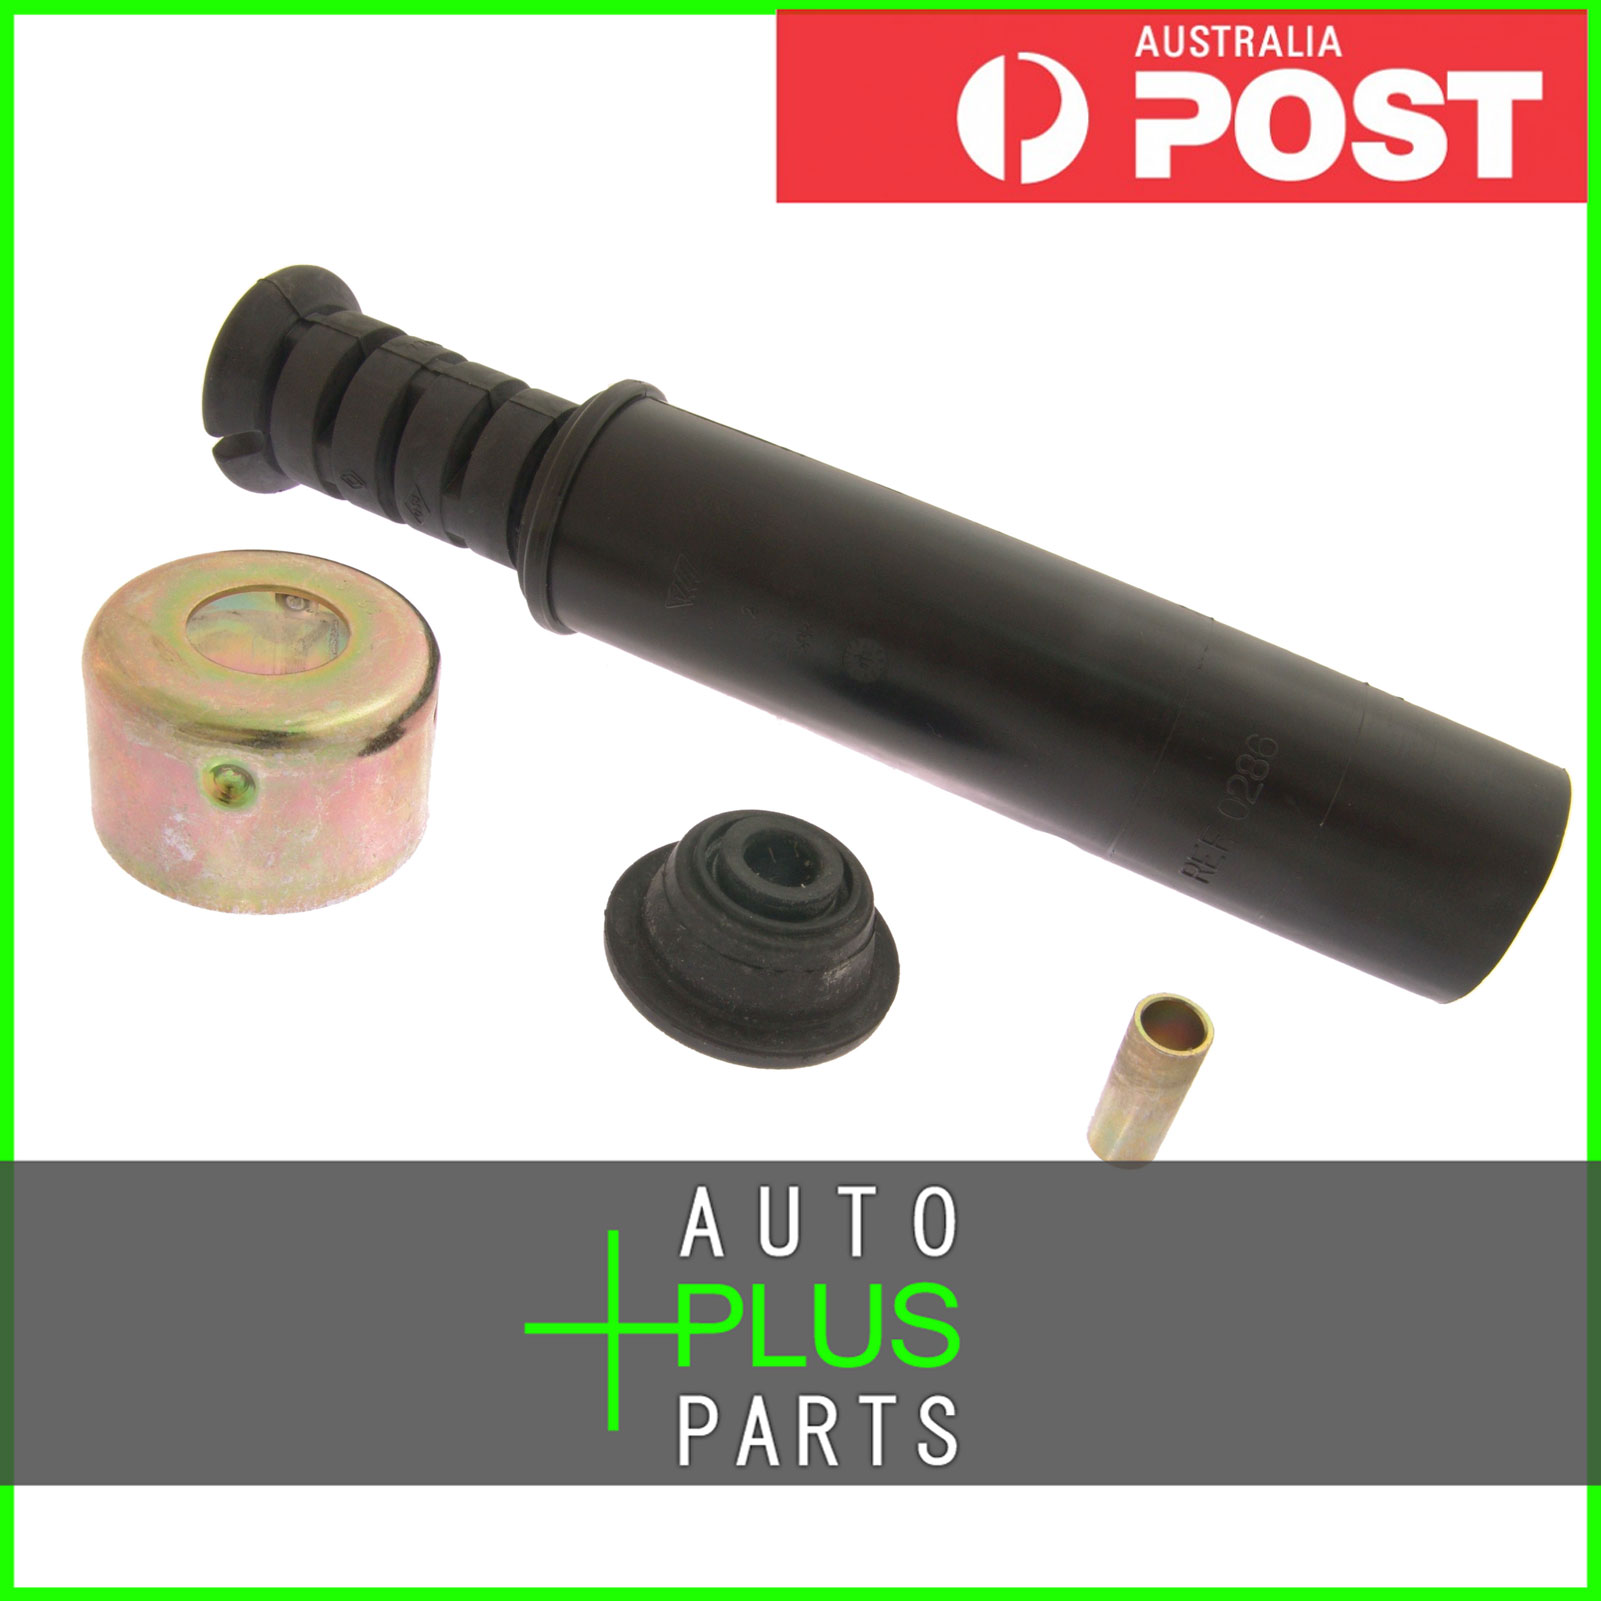 Fits NISSAN TIIDA C11 Rear Shock Absorber Boot Product Photo